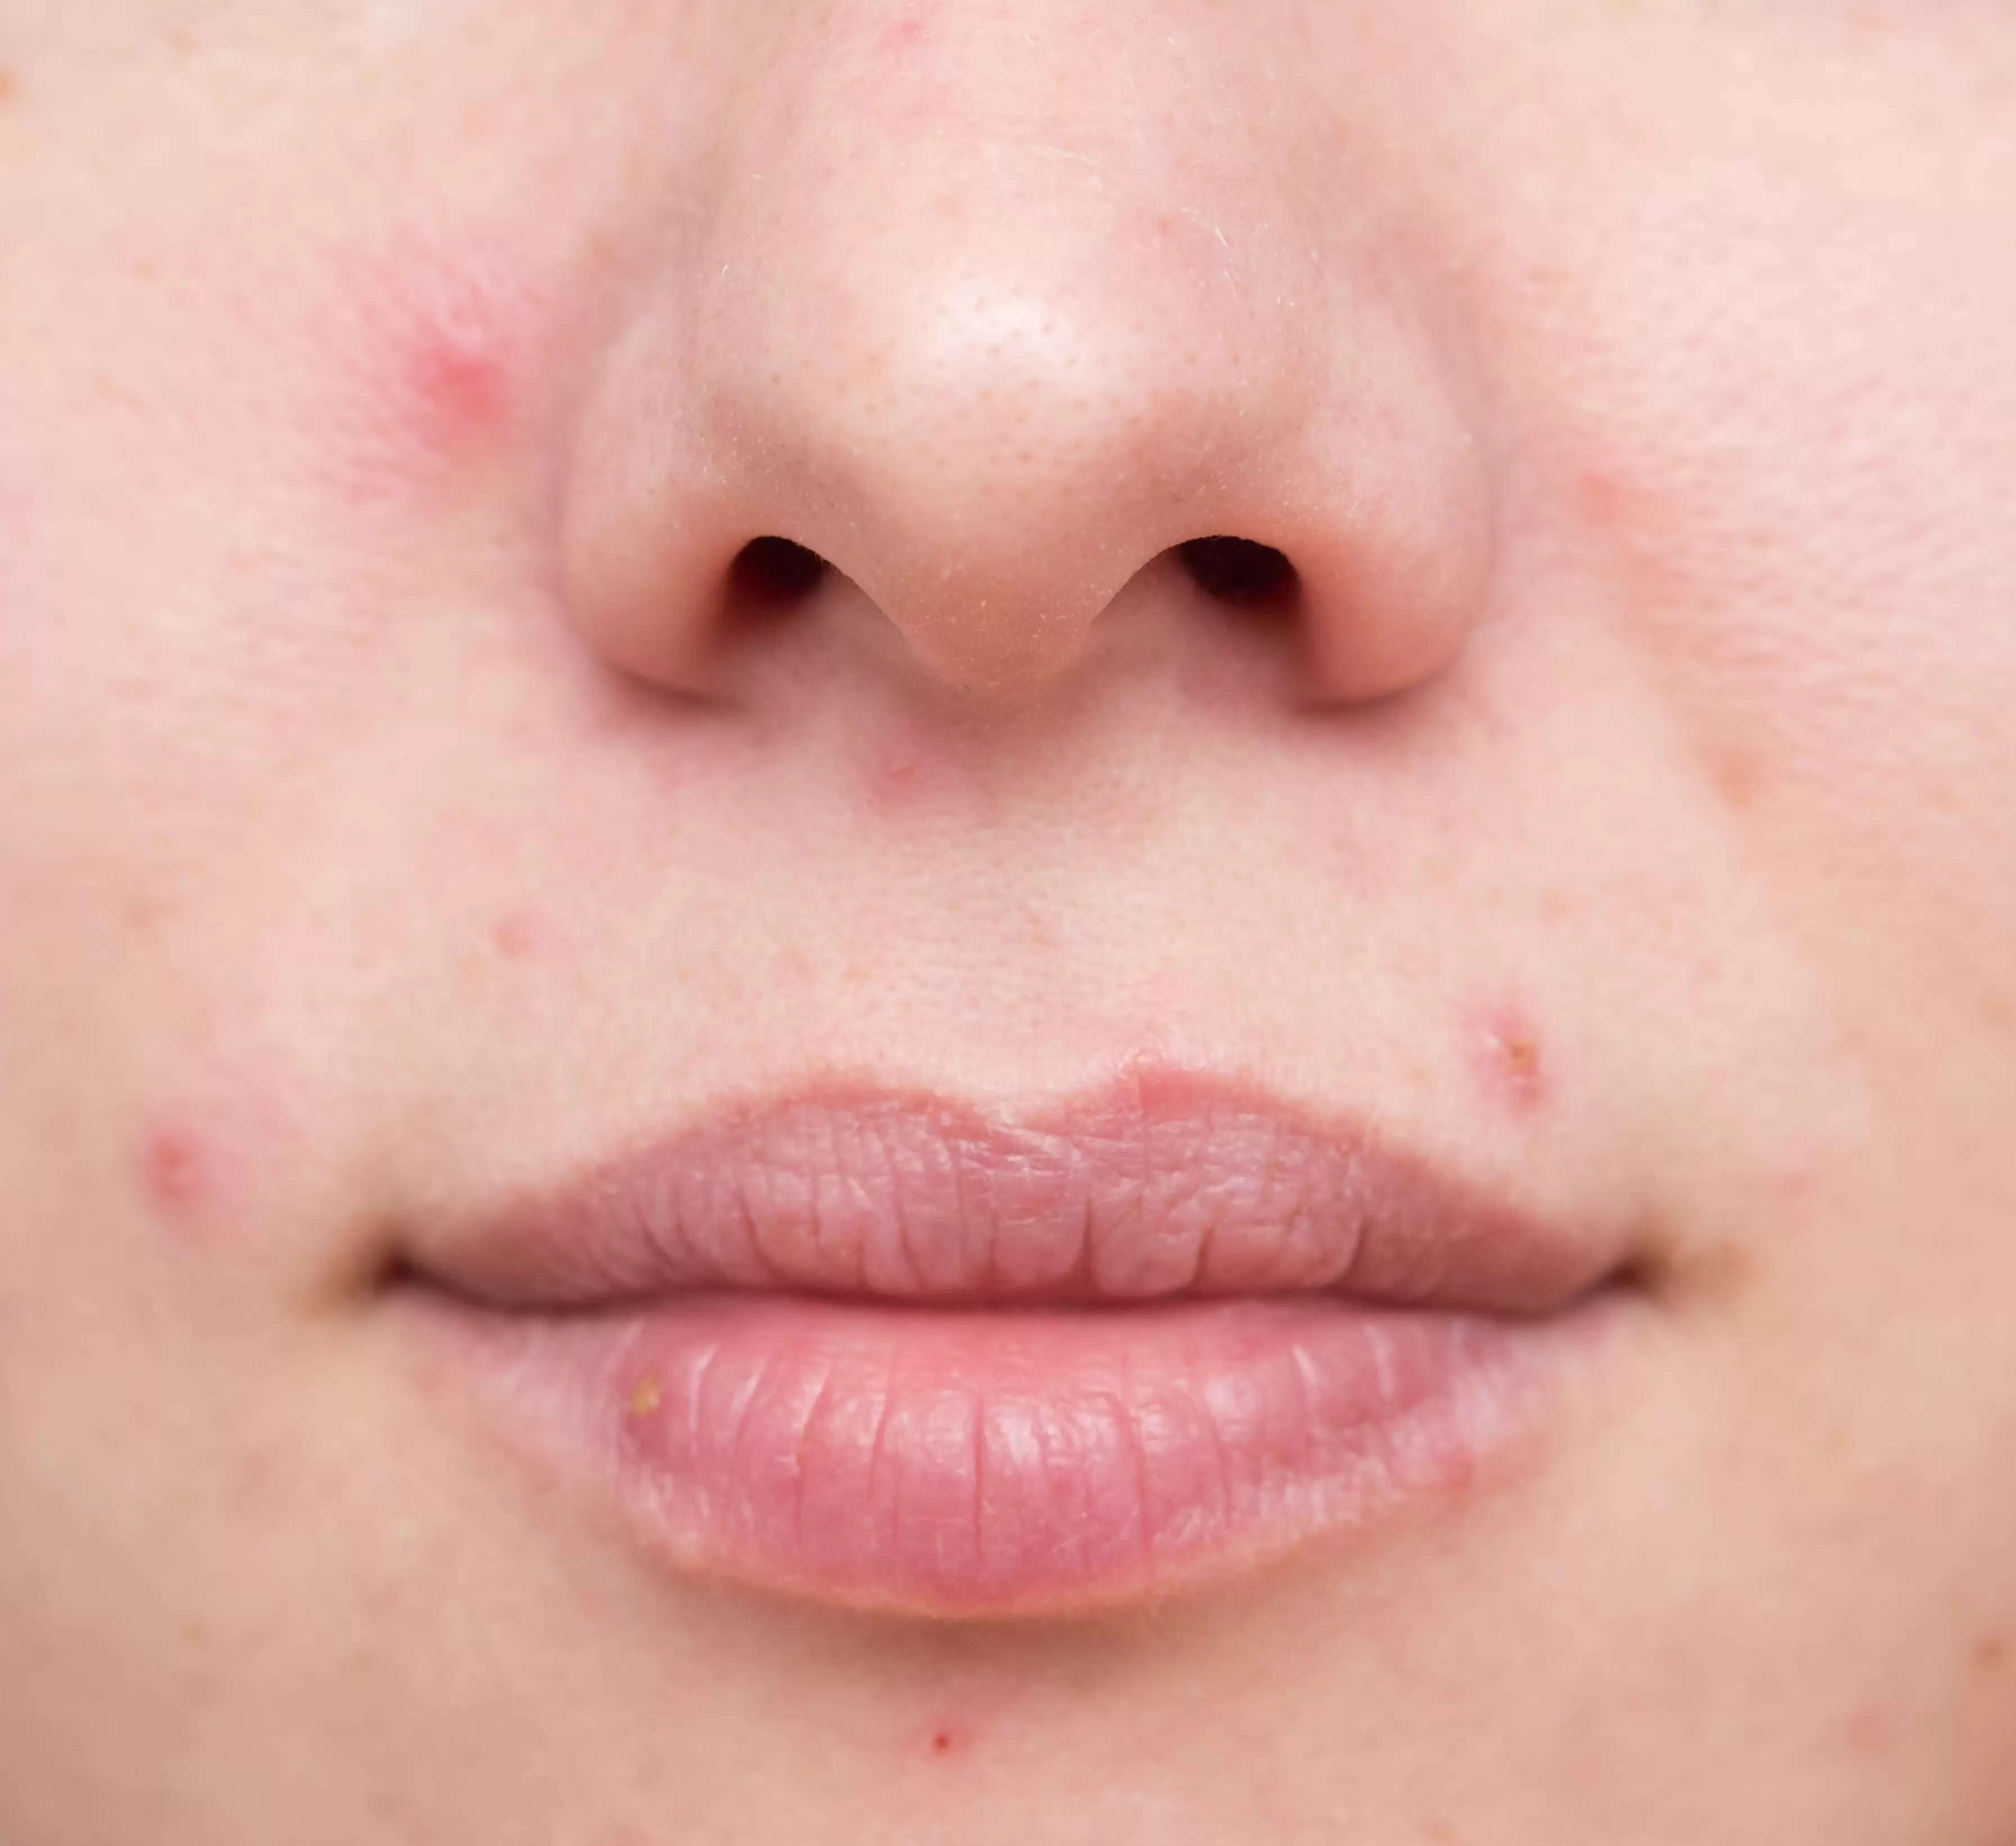 Relief from acne scars through simple effective treatments